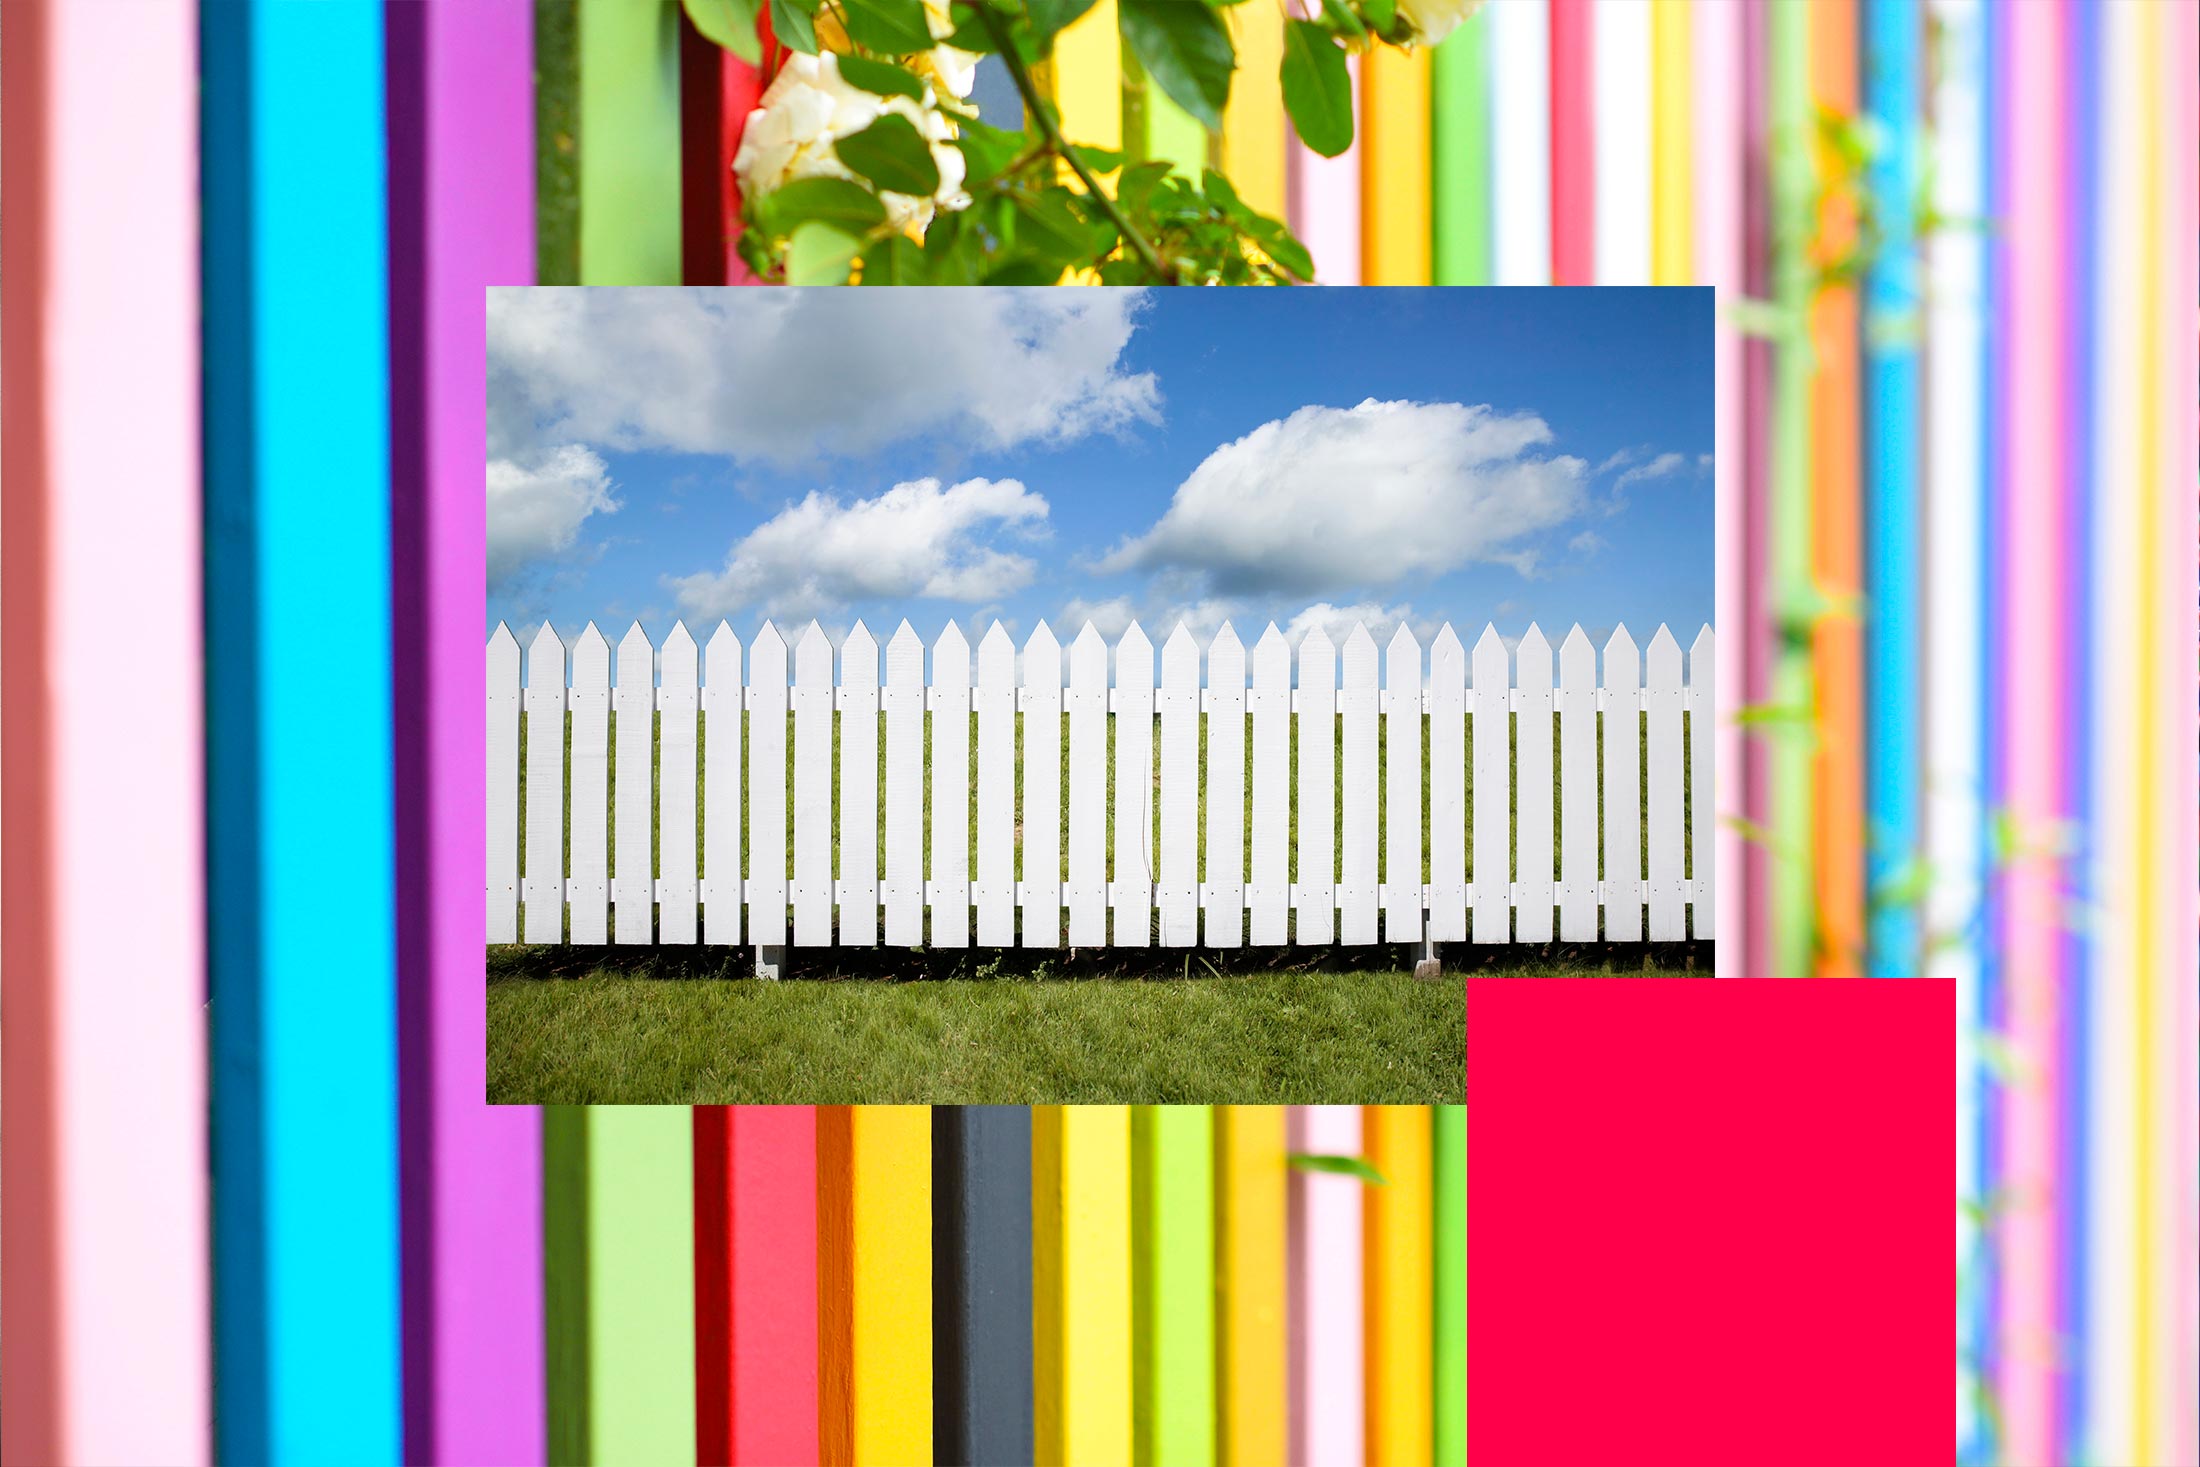 Rainbow picket fence surrounding a white picket fence.